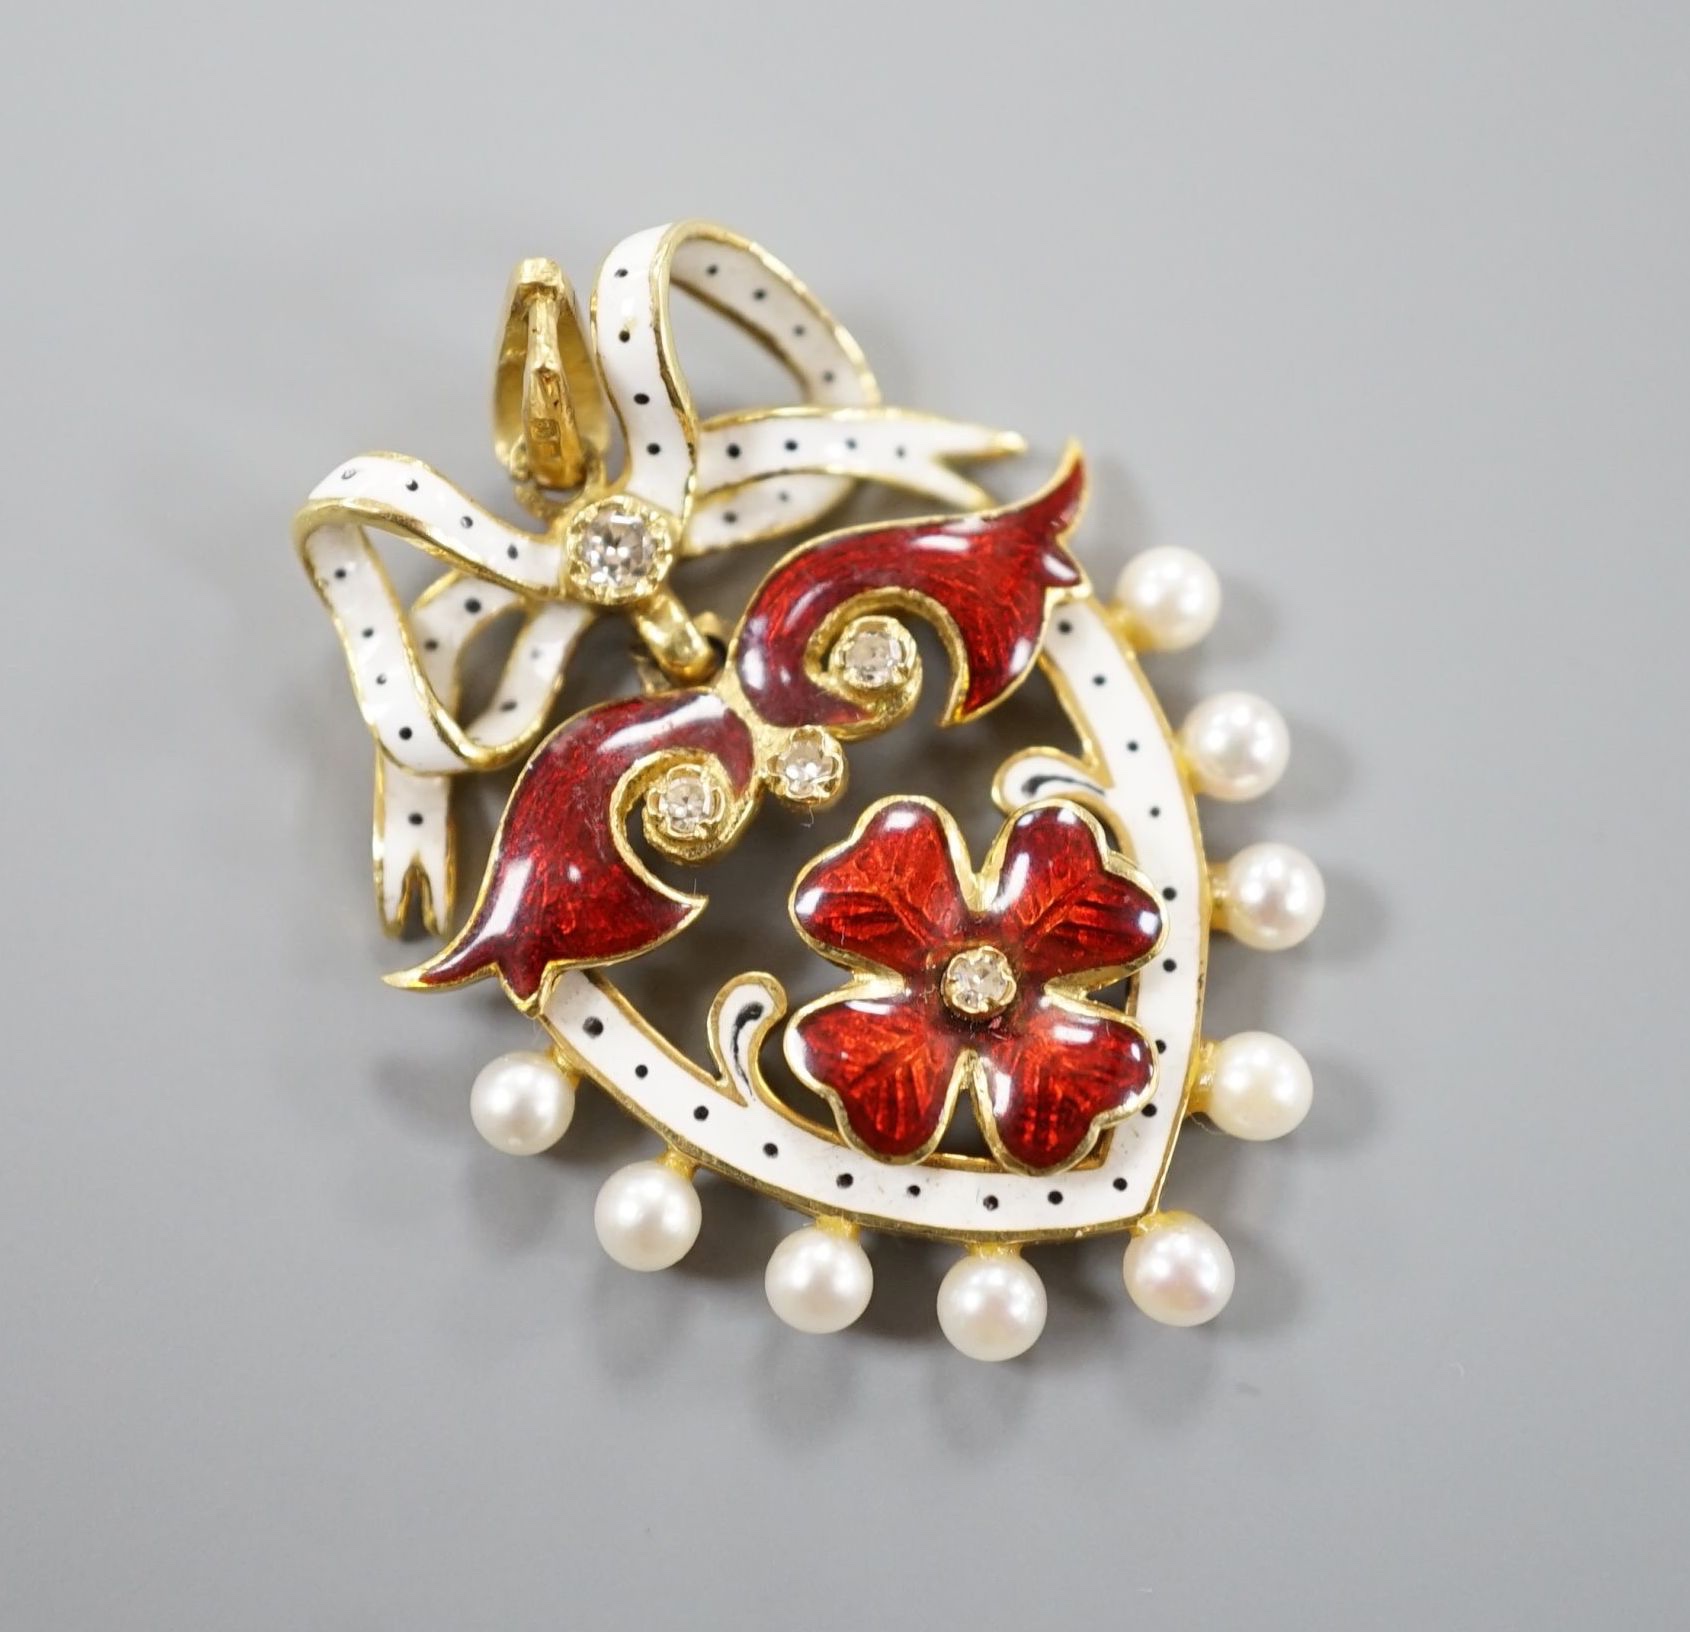 A 1960's 18ct gold, diamond, seed pearl and two colour enamel set heart shaped pendant, with ribbon bow crest, 35mm, gross weight 8.7 grams.